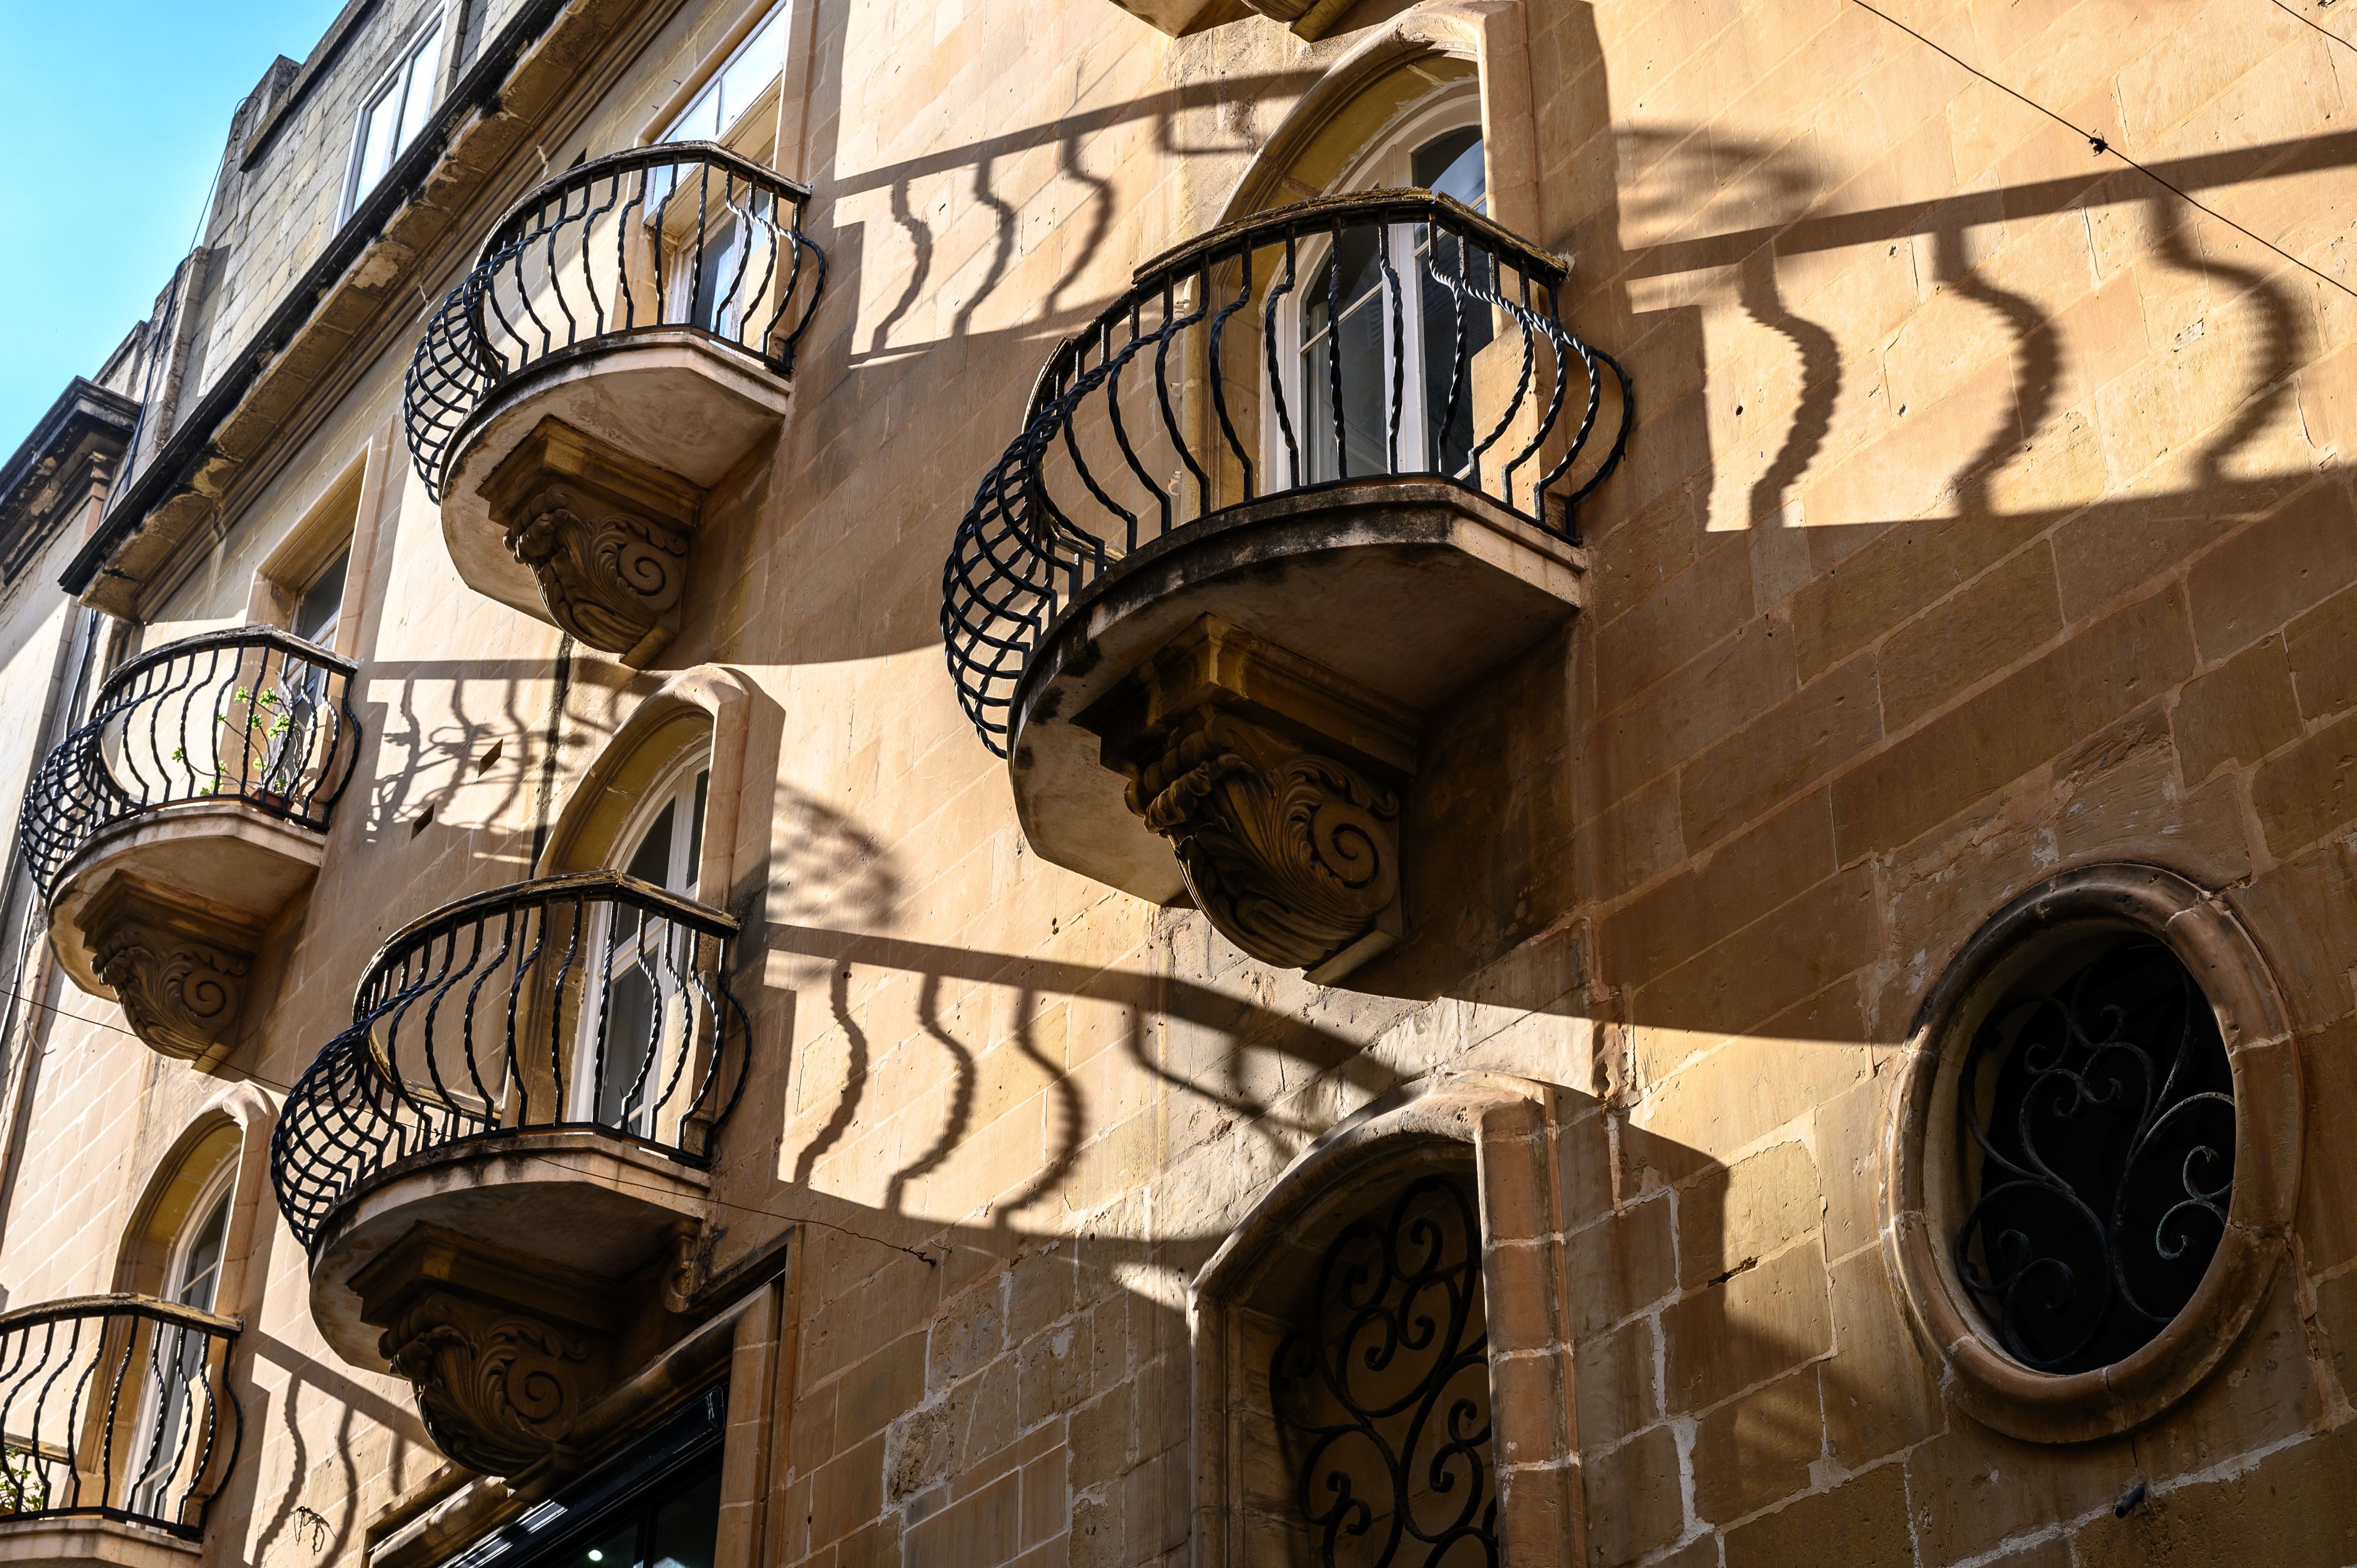 Balconies in Malta with their ironwork shadows